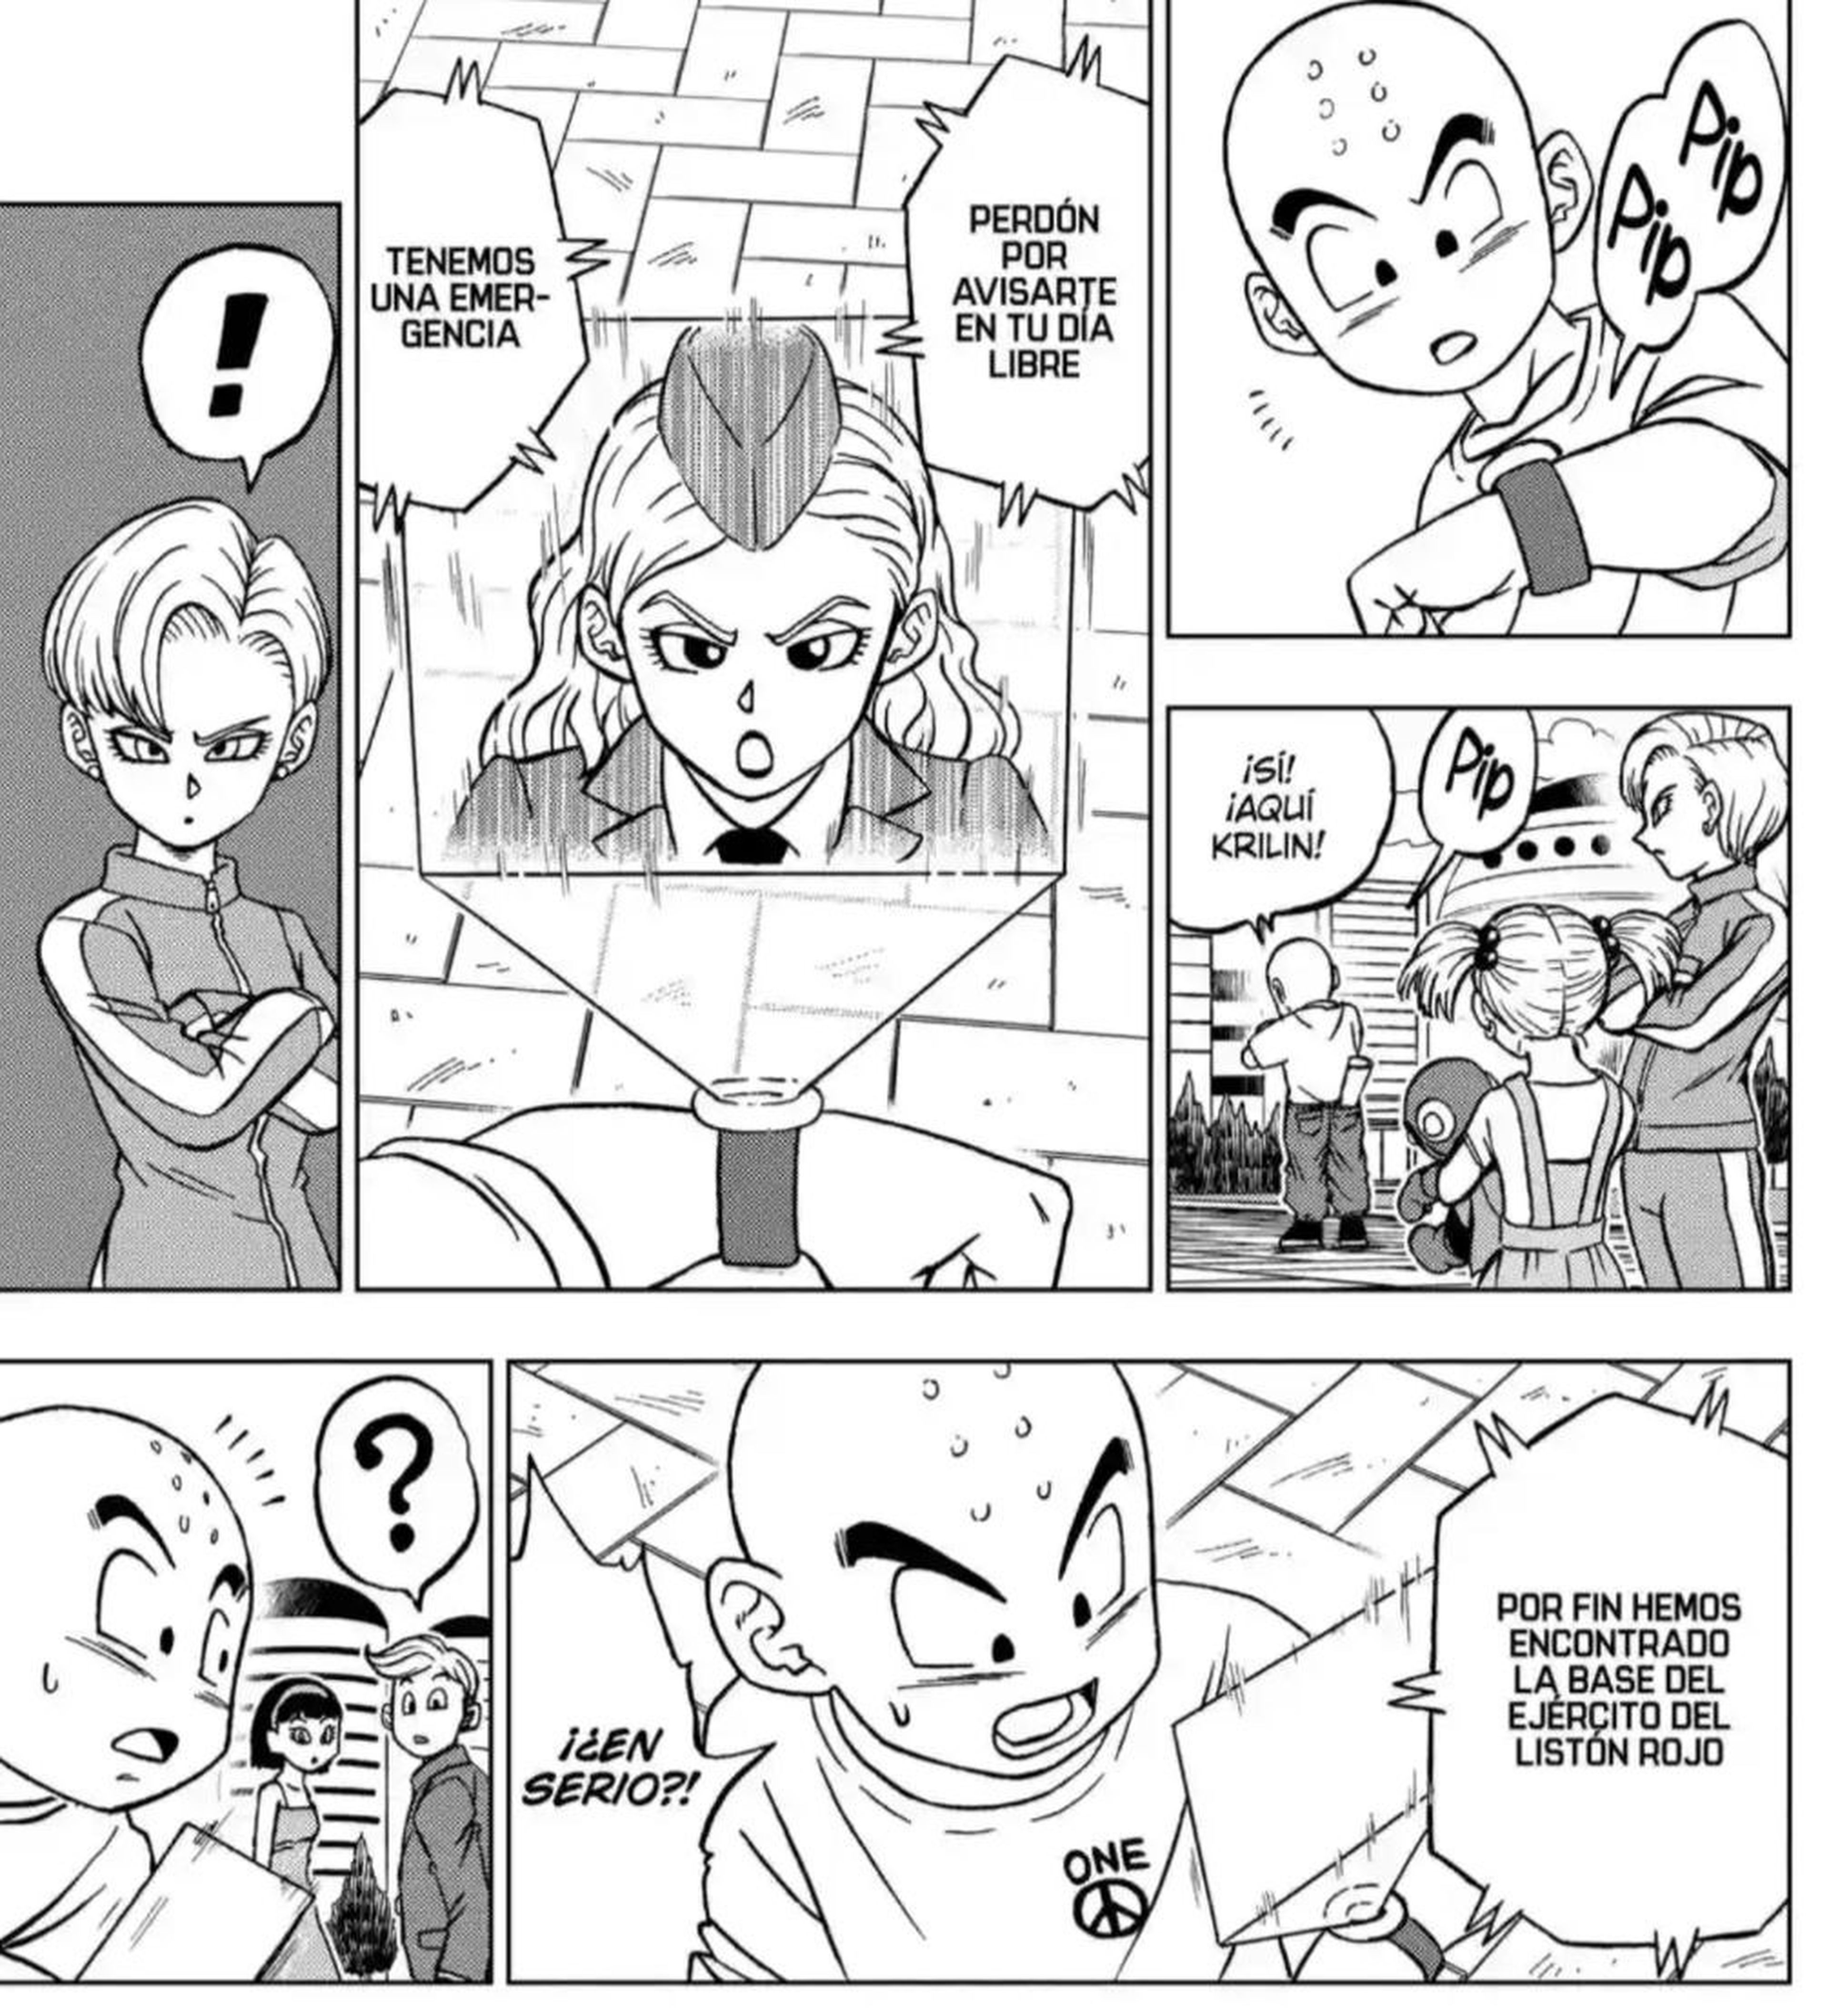 Dragon Ball Super - Analysis of chapter 95 in which Piccolo